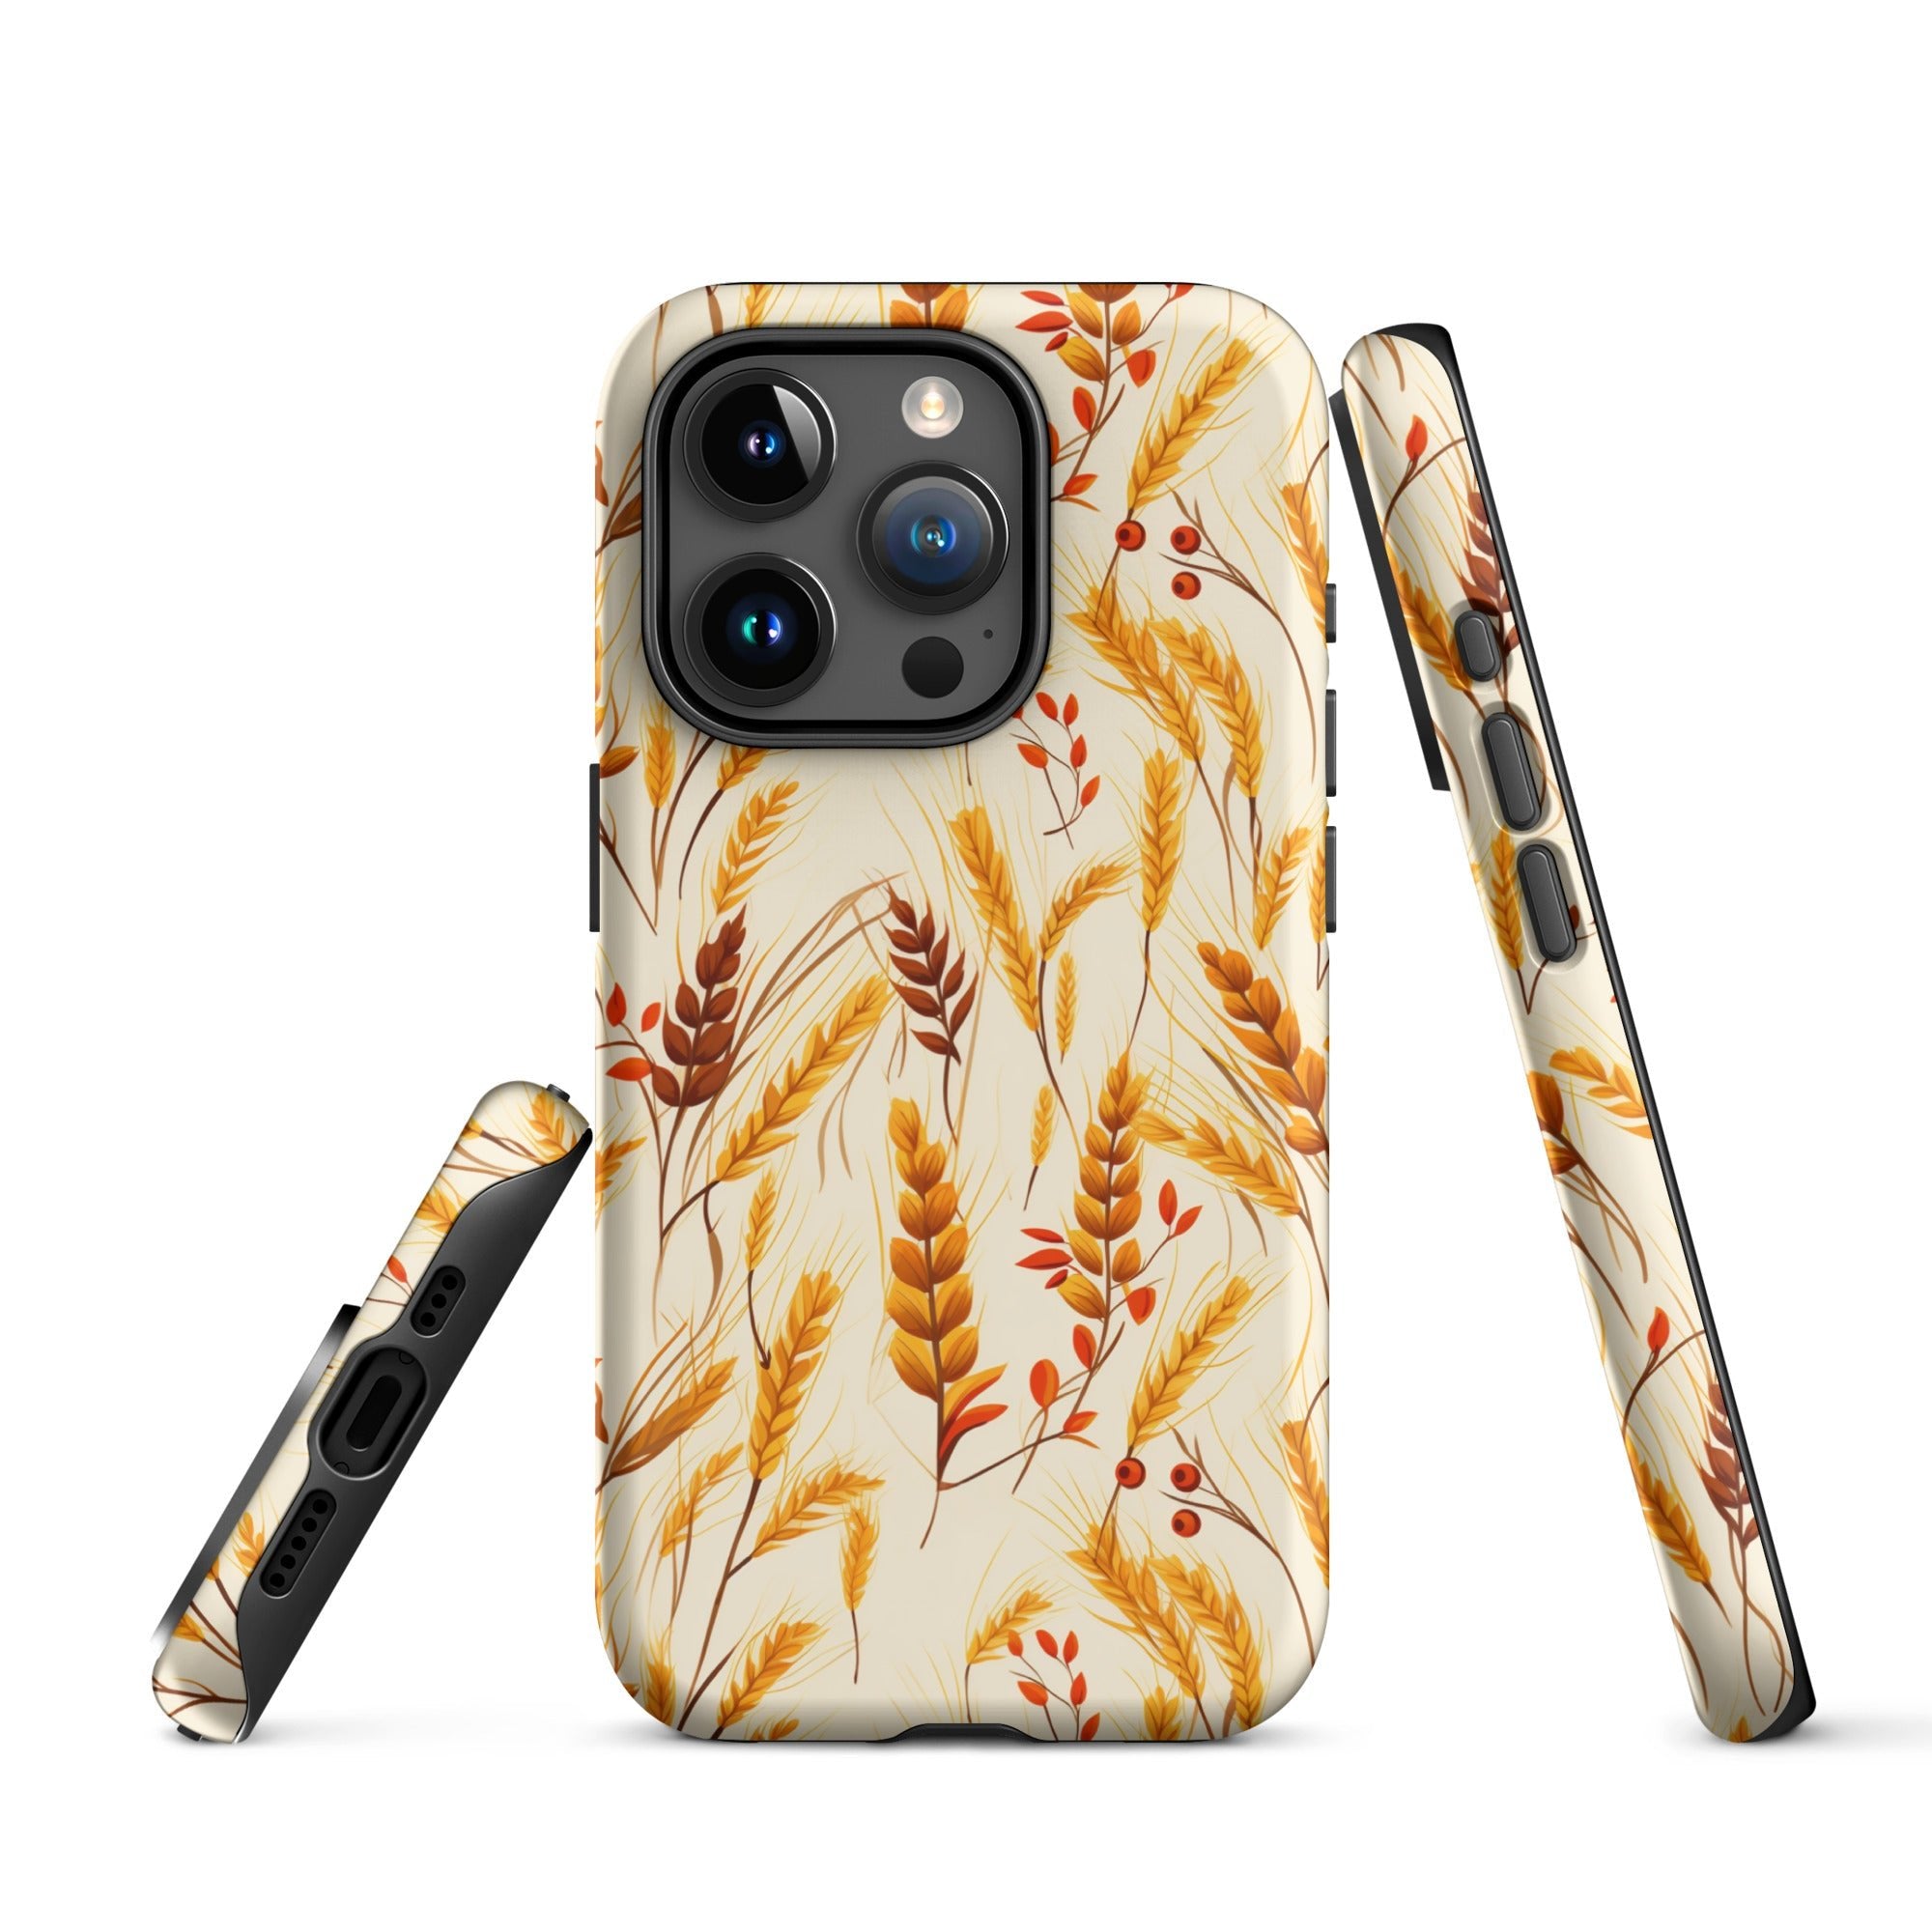 Golden Harvest - An Autumn Collage of Wheat and Berries - iPhone Case - Pattern Symphony